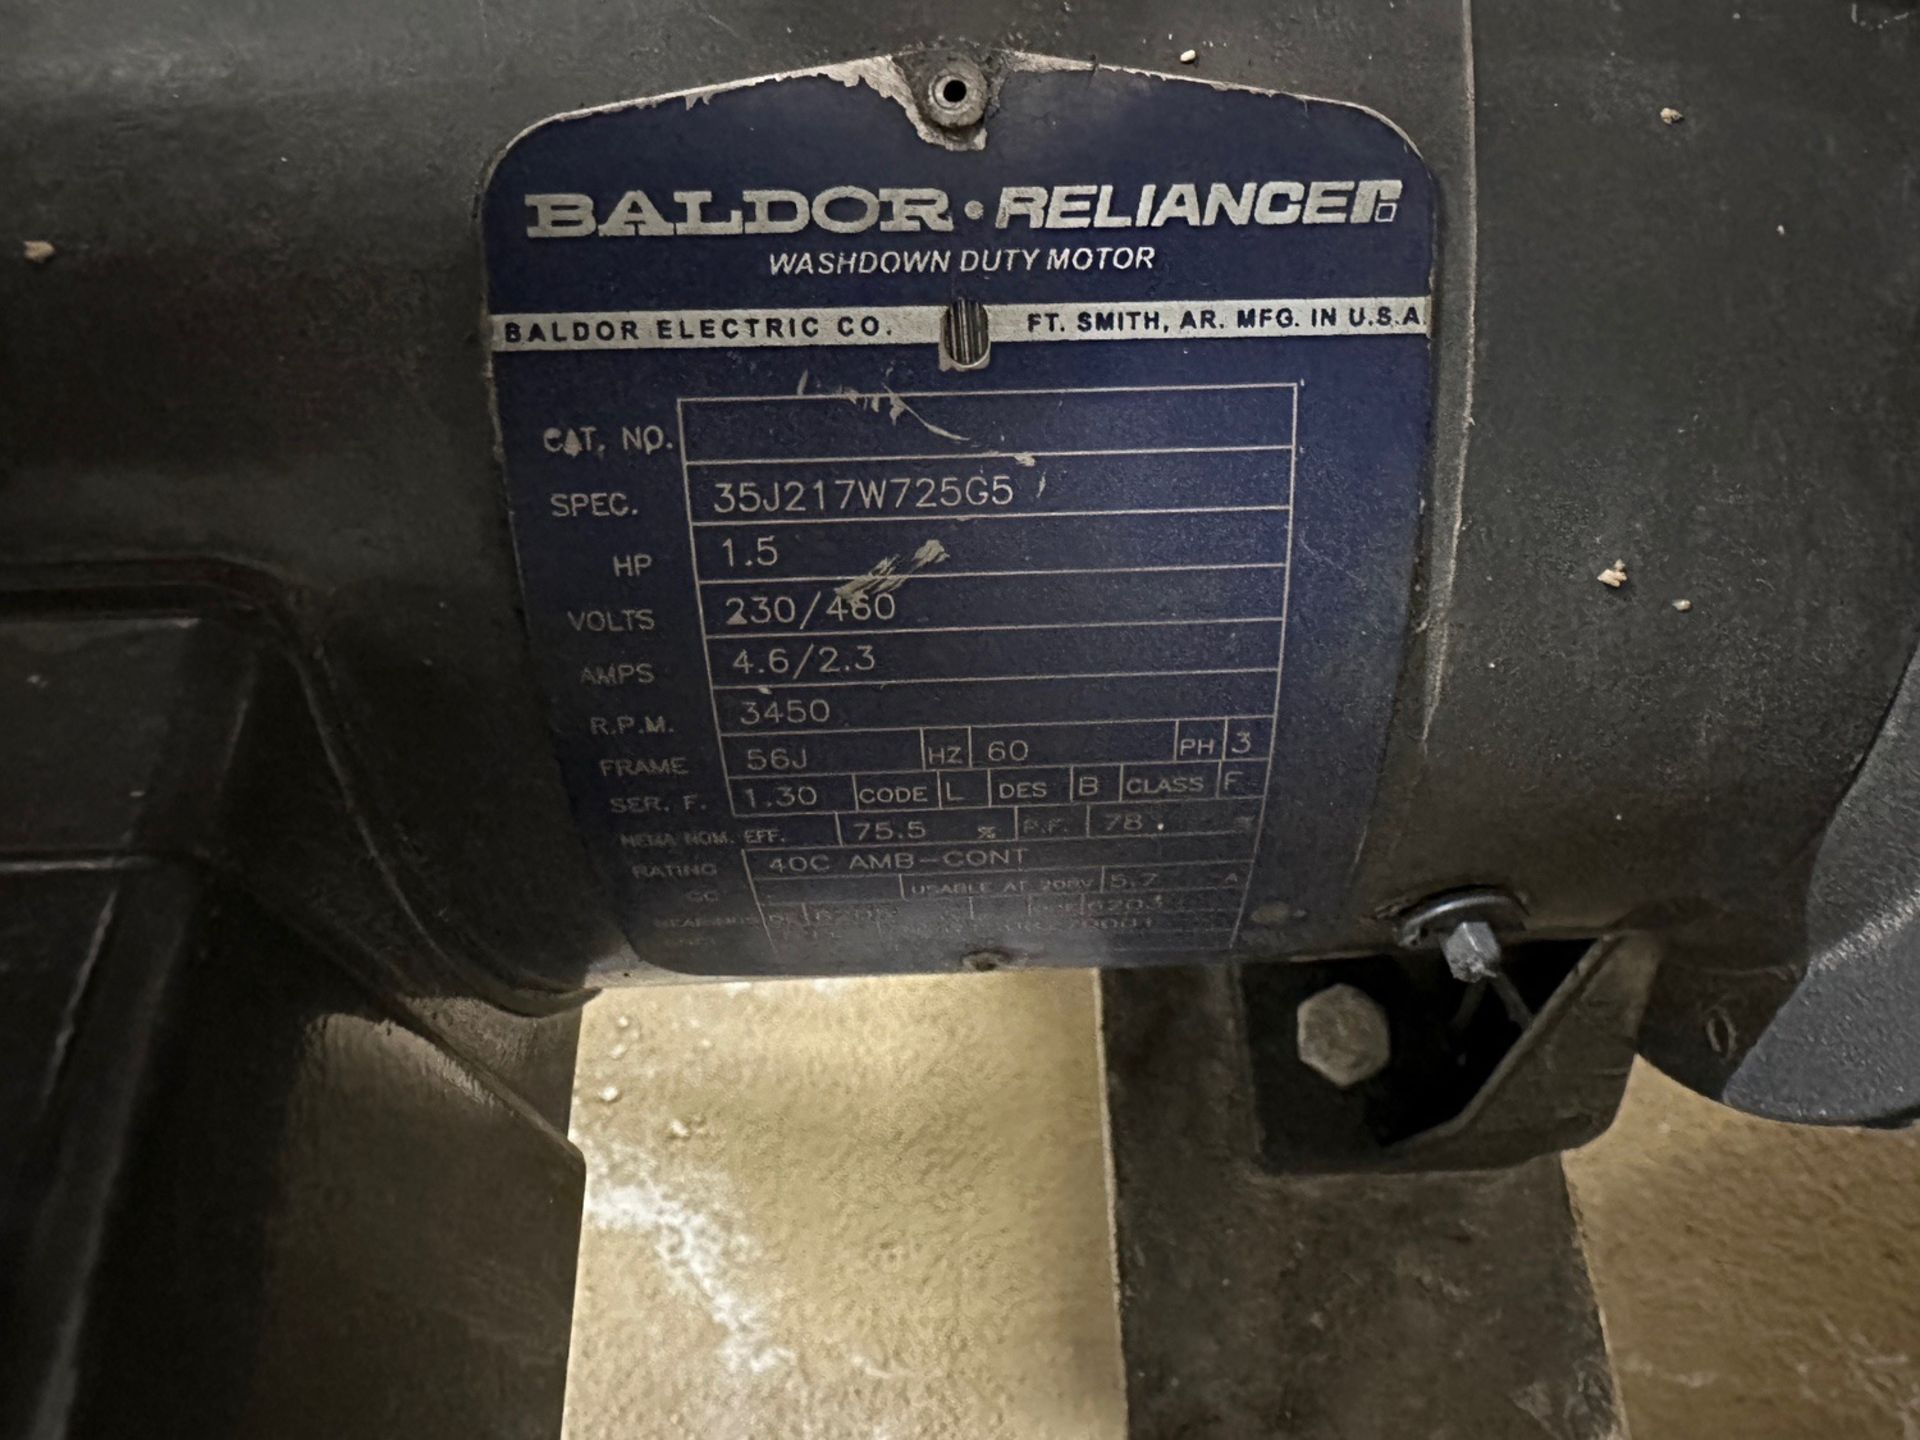 1.5 HP Baldor Reliance Washdown Motor with AMPCO Centrifugal Pump | Rig Fee $50 - Image 2 of 4